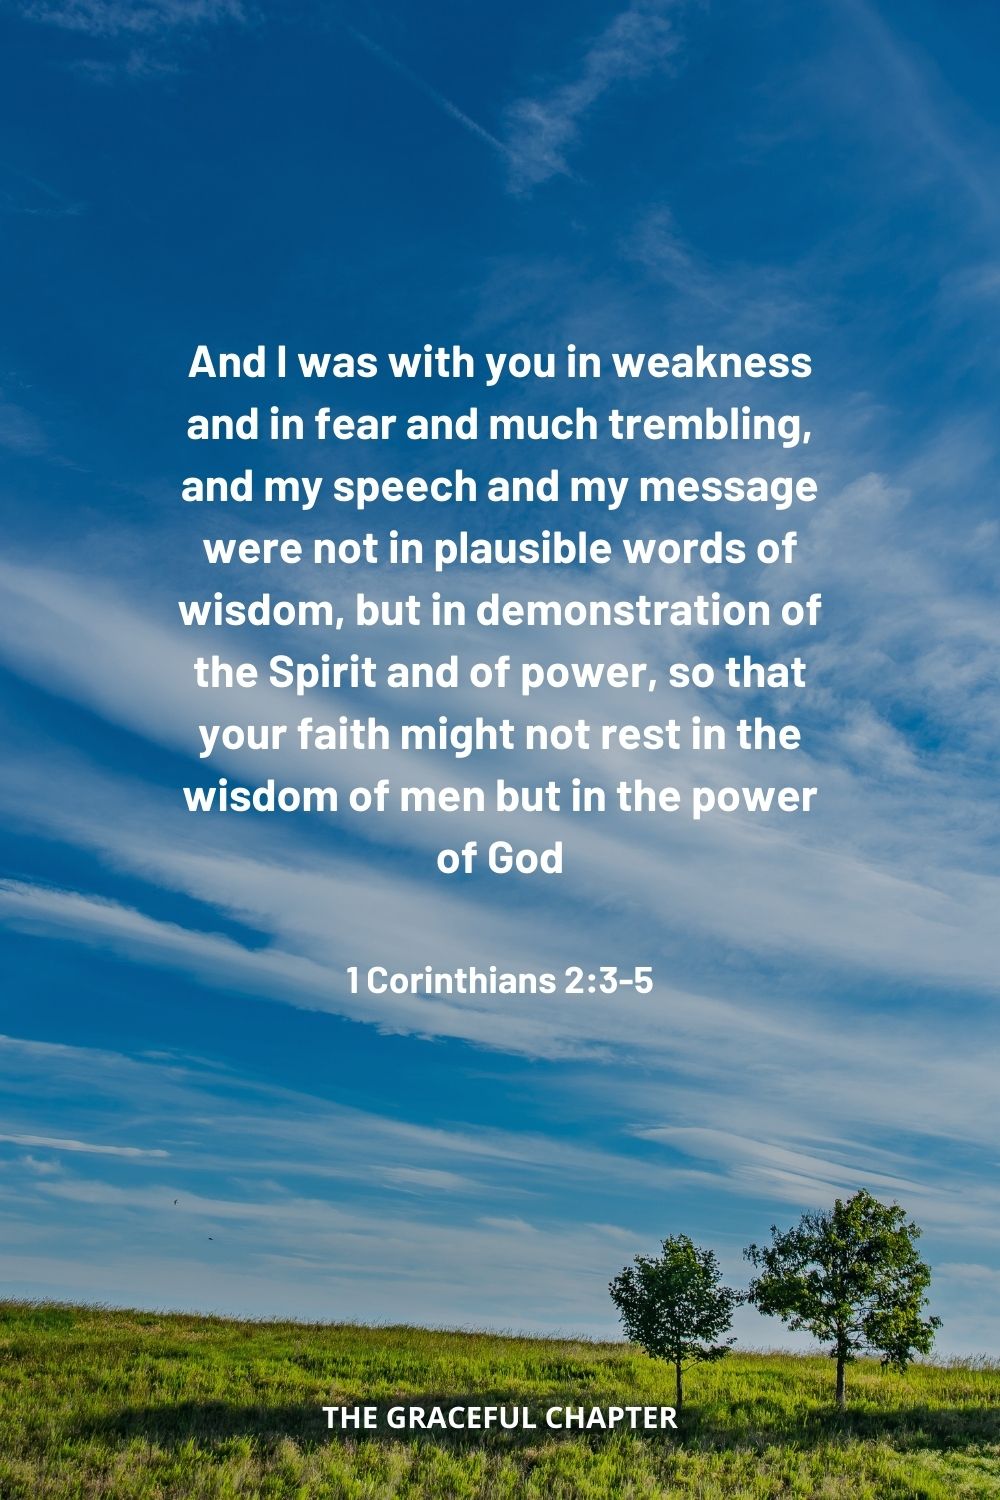 And I was with you in weakness and in fear and much trembling, and my speech and my message were not in plausible words of wisdom, but in demonstration of the Spirit and of power, so that your faith might not rest in the wisdom of men but in the power of God. 1 Corinthians 2:3-5